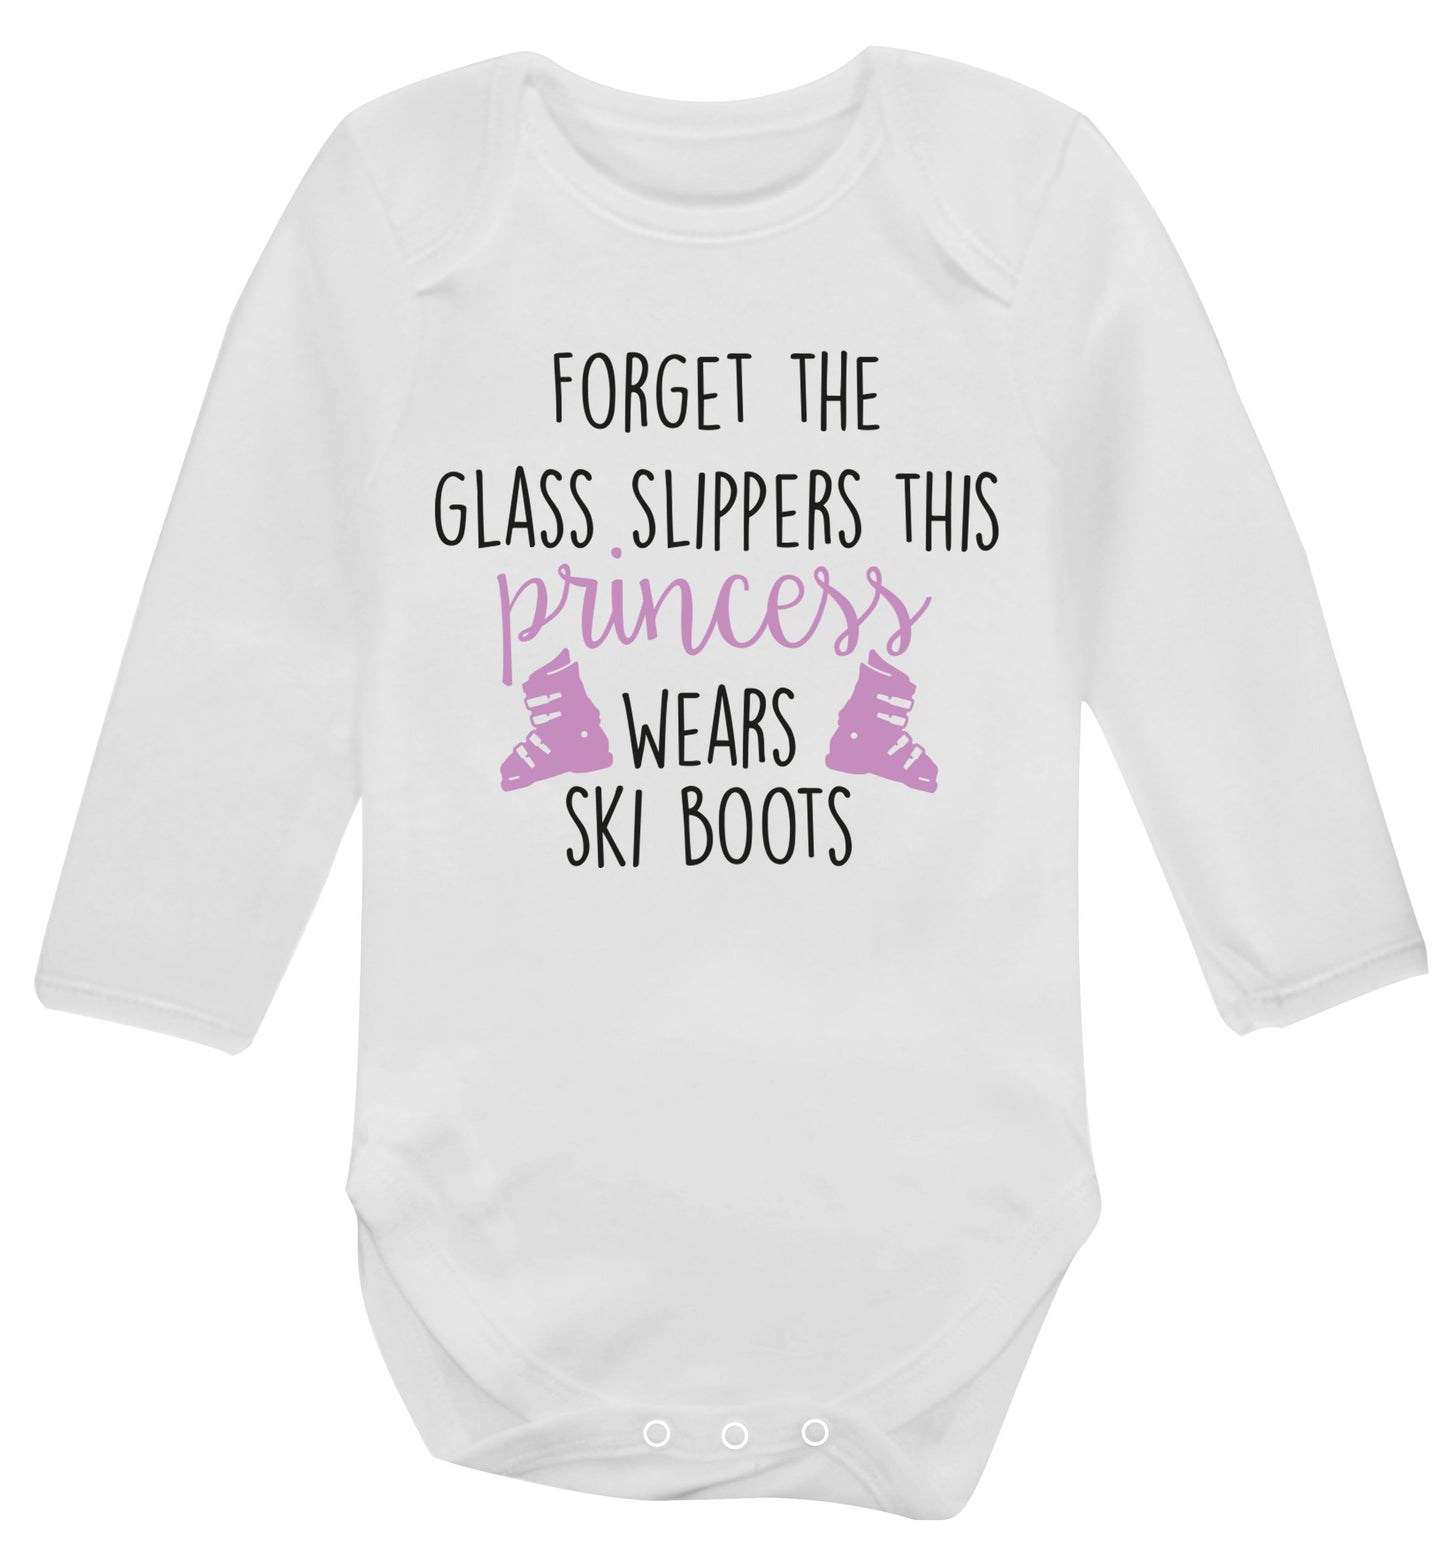 Forget the glass slippers this princess wears ski boots Baby Vest long sleeved white 6-12 months